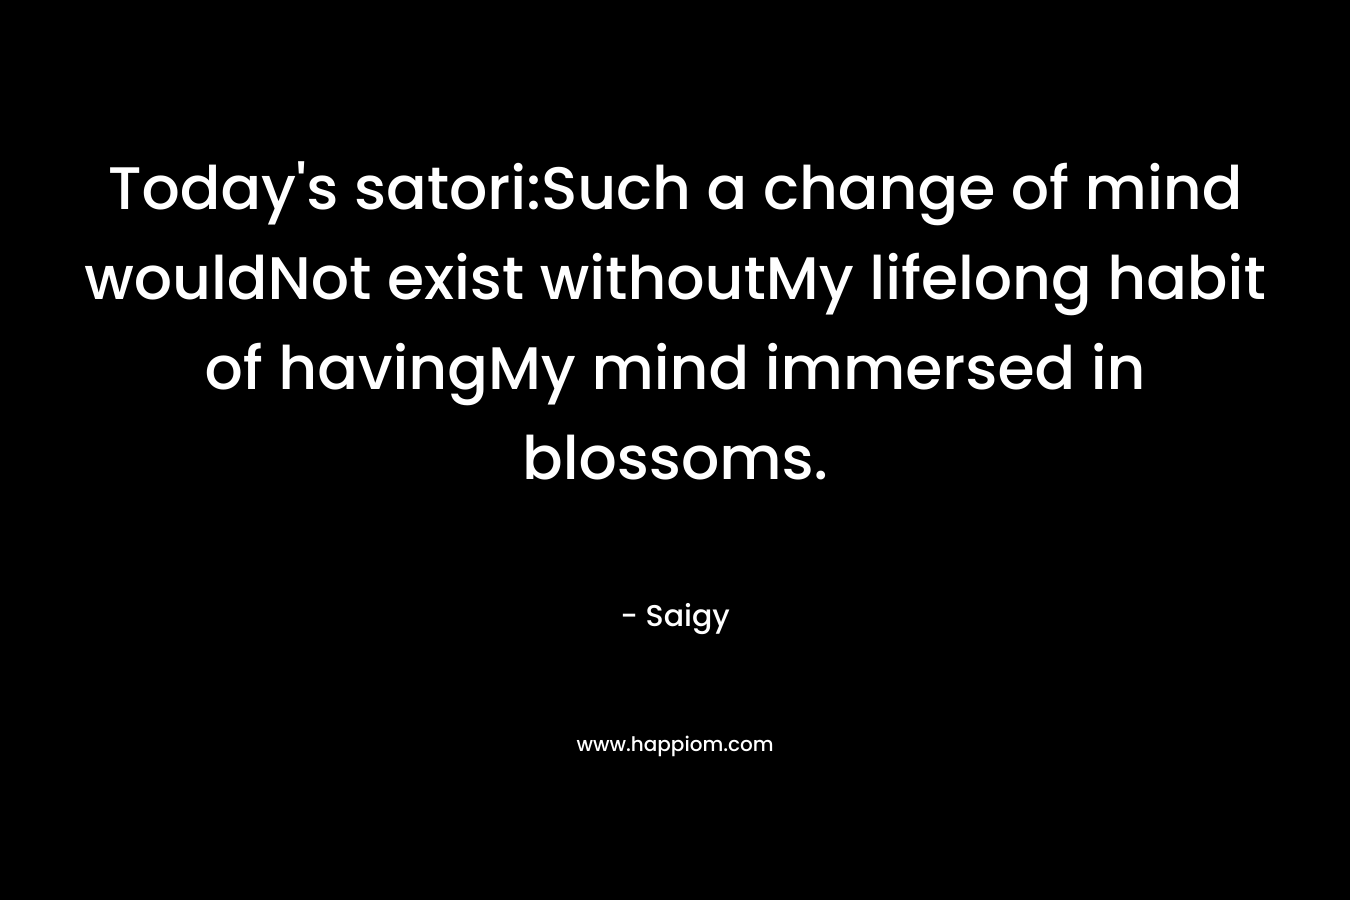 Today’s satori:Such a change of mind wouldNot exist withoutMy lifelong habit of havingMy mind immersed in blossoms. – Saigy